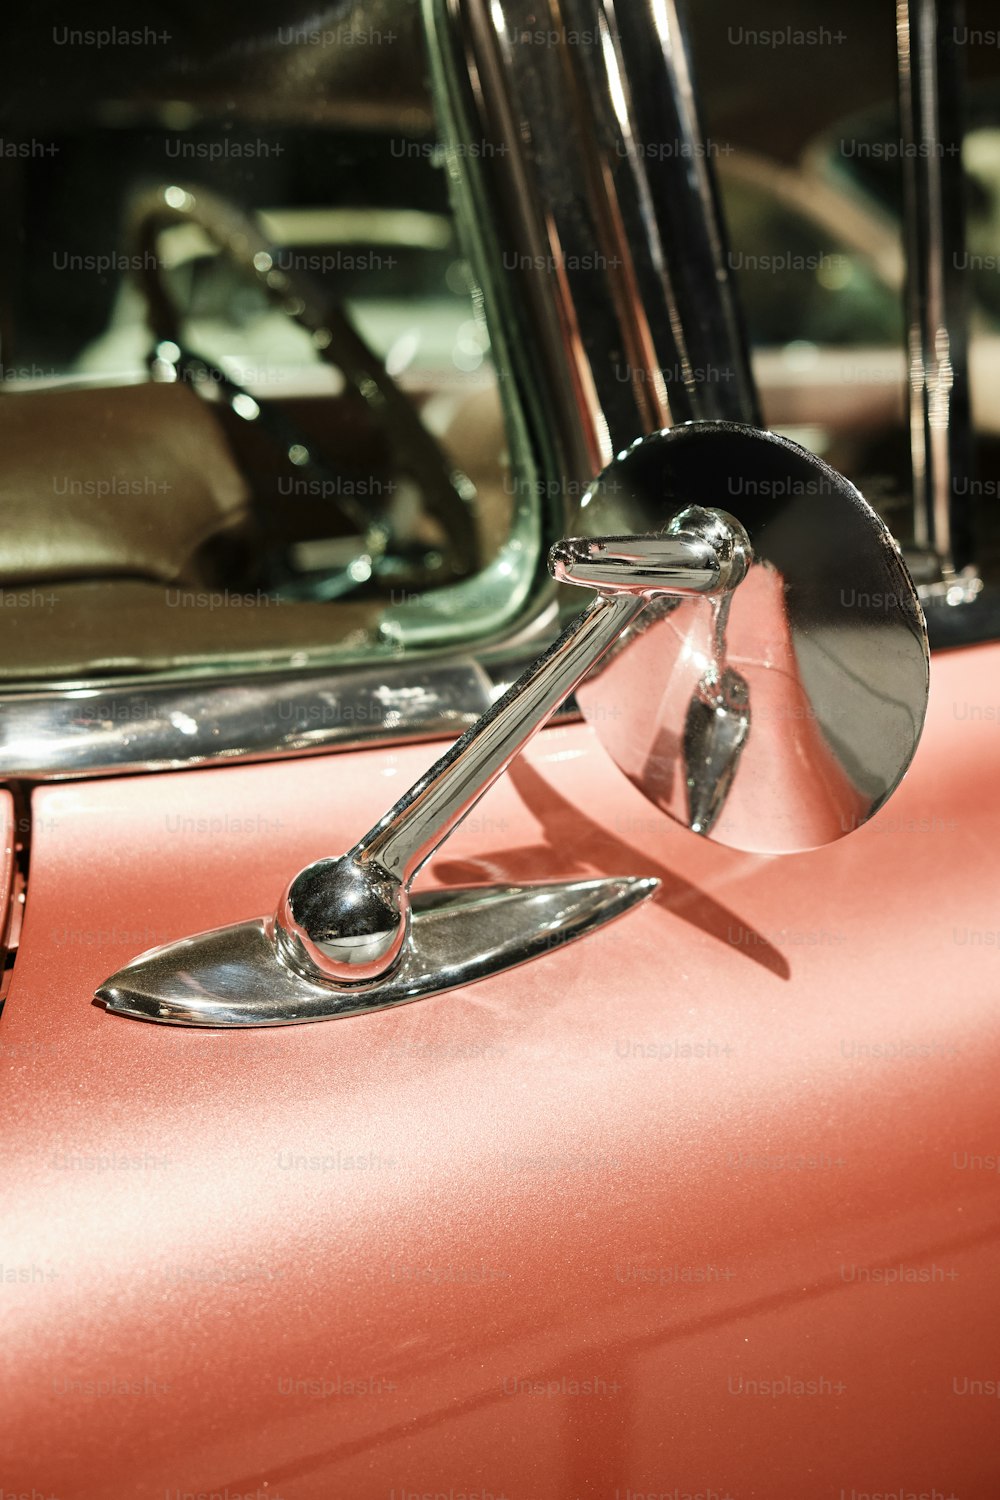 a close up of a mirror on a car